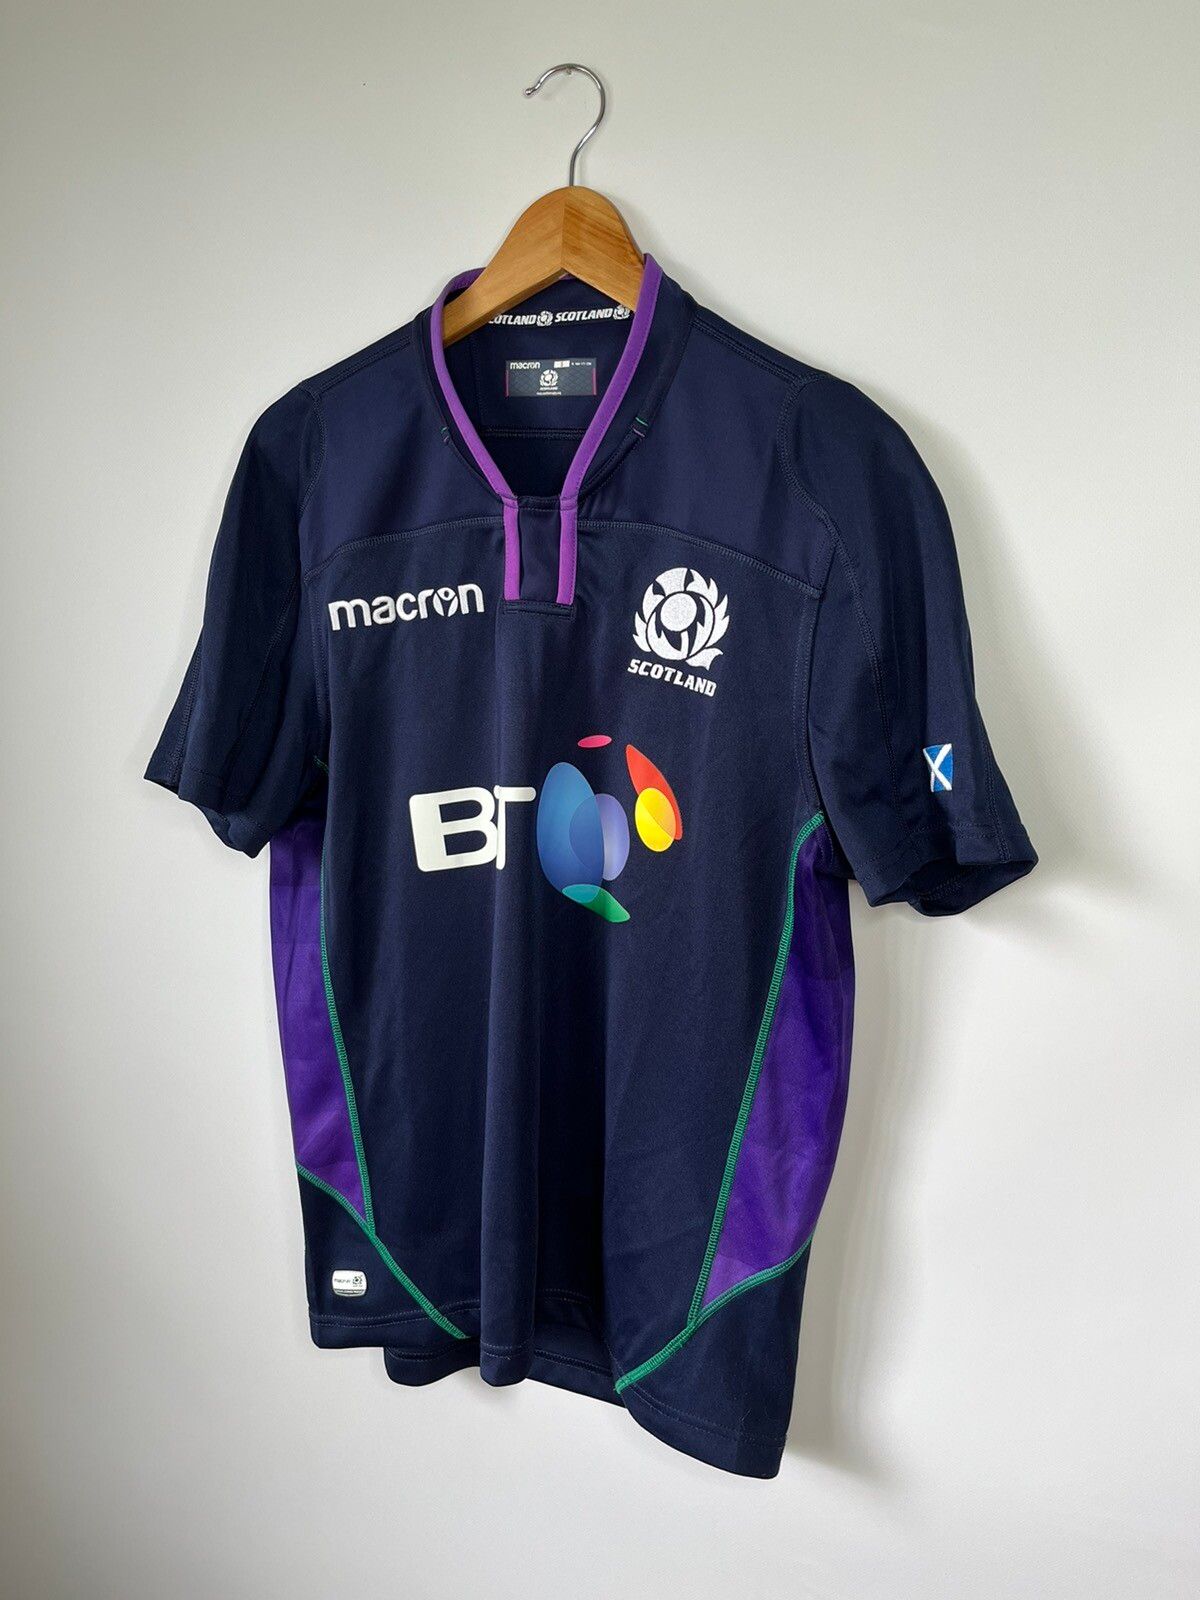 Jersey Scotland National Team Rugby Jersey Shirt Macron Size S Size US S / EU 44-46 / 1 - 2 Preview